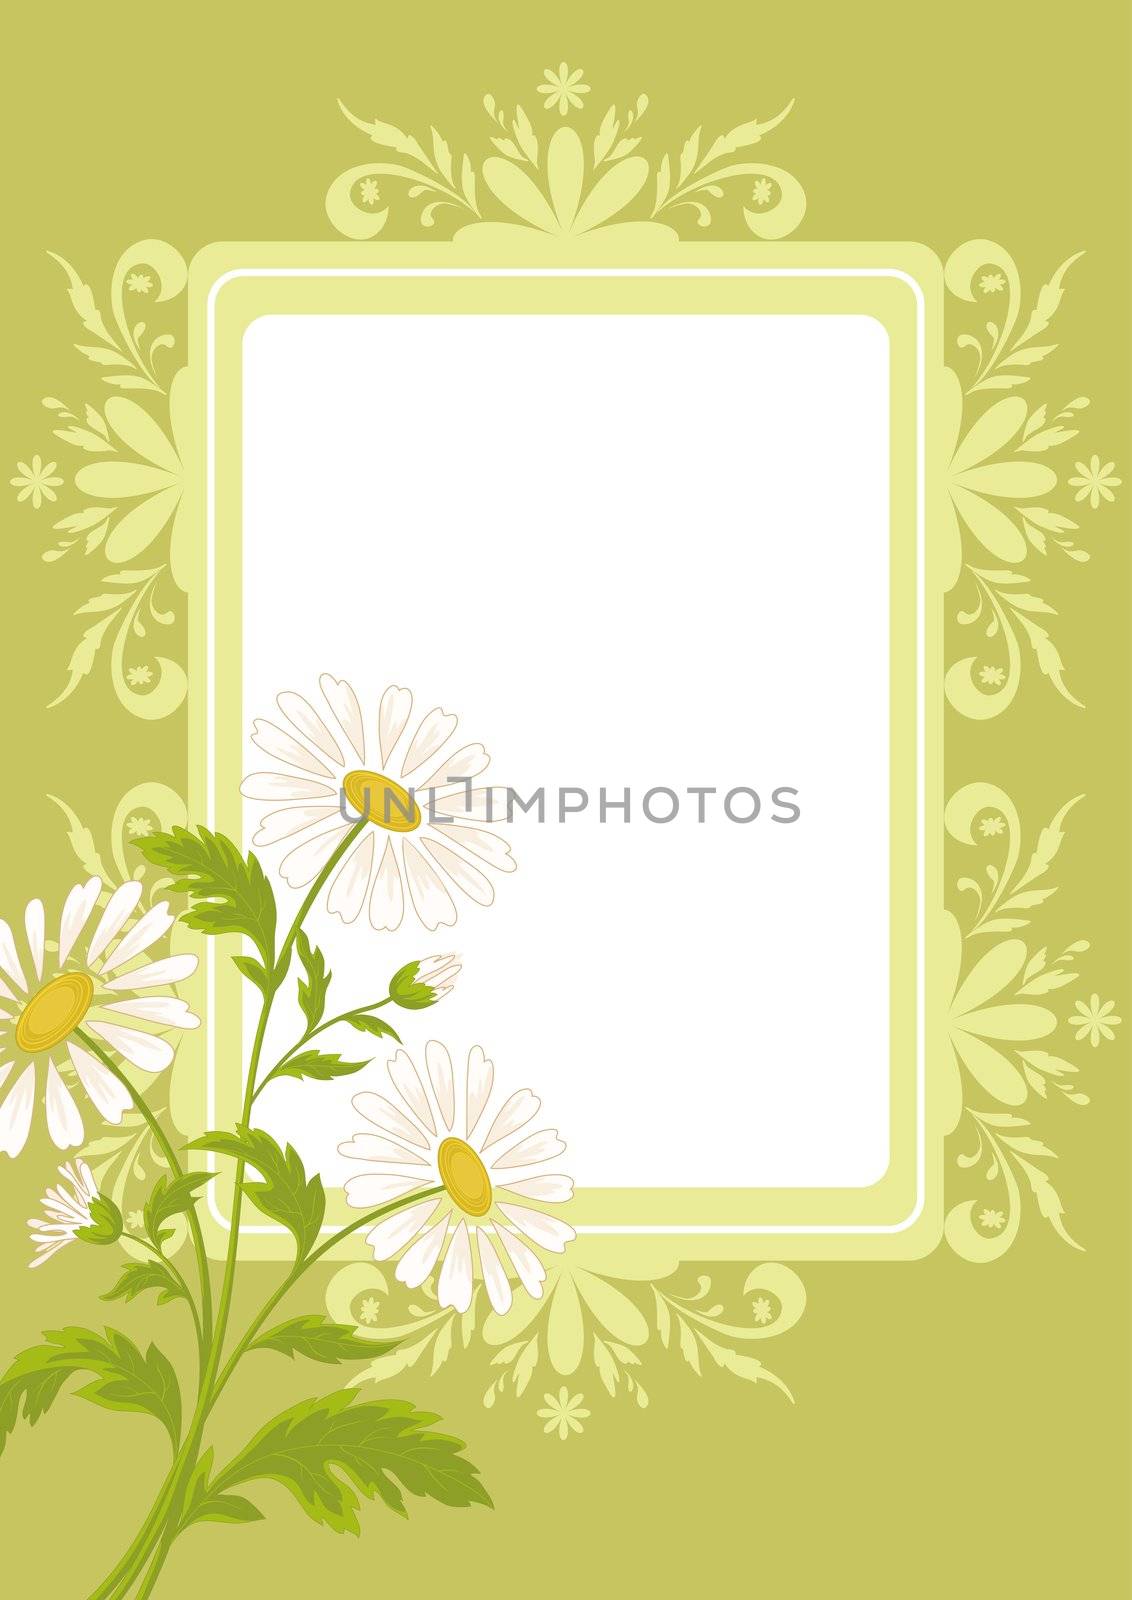 Floral holiday background with chamomile flowers and a blank white rectangle.